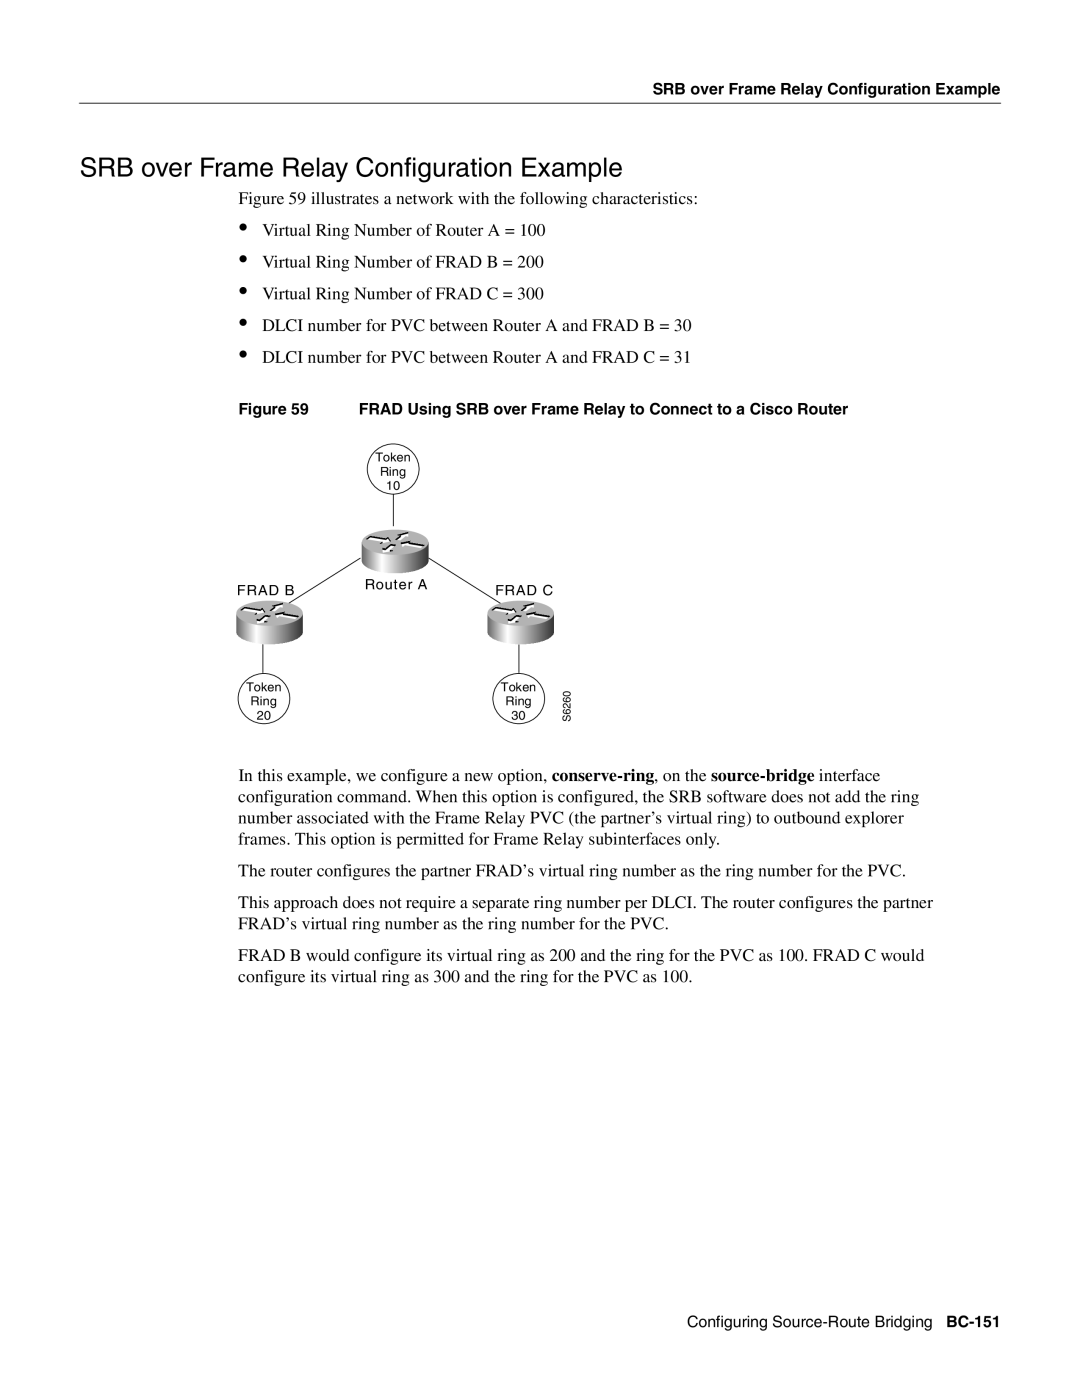 Cisco Systems BC-109 manual SRB over Frame Relay Configuration Example 